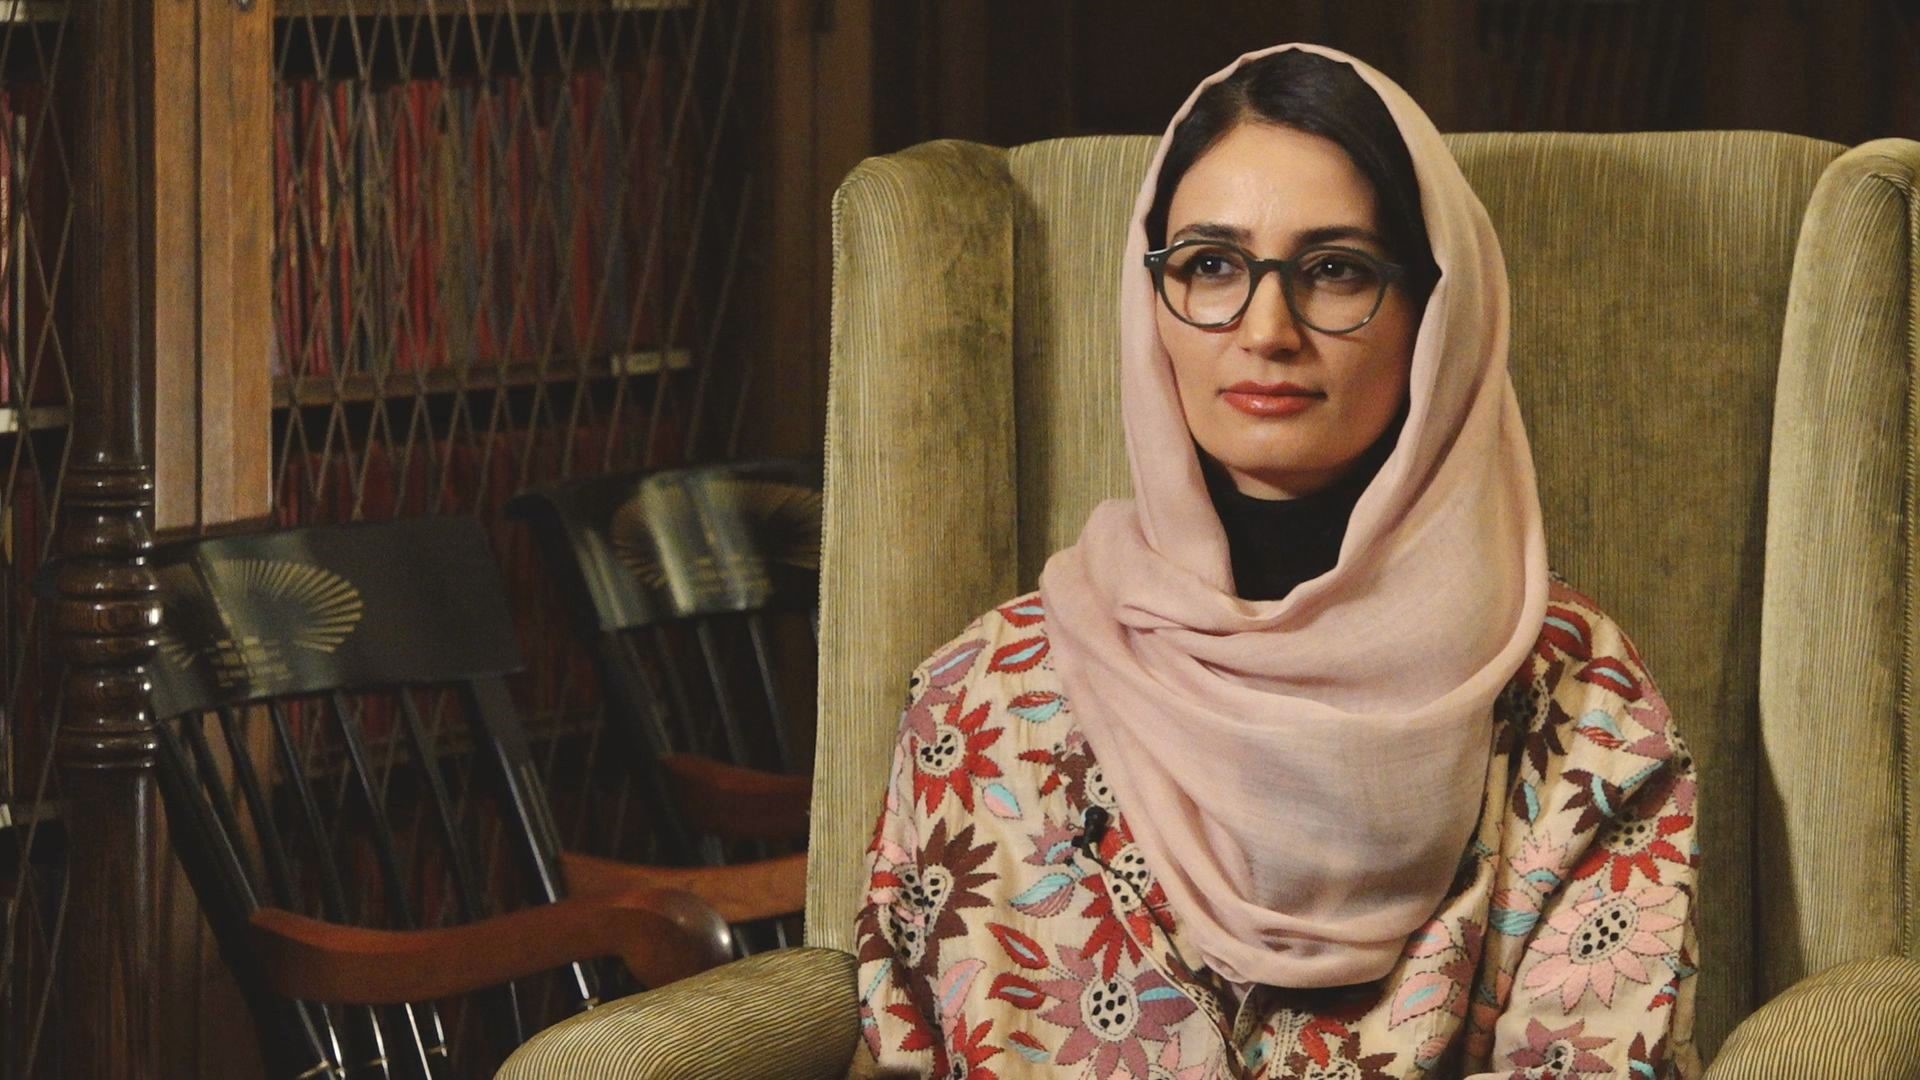 Fereshteh Forough founded the first female coding school in Afghanistan. Last year when the Taliban took over, the school was forced underground.